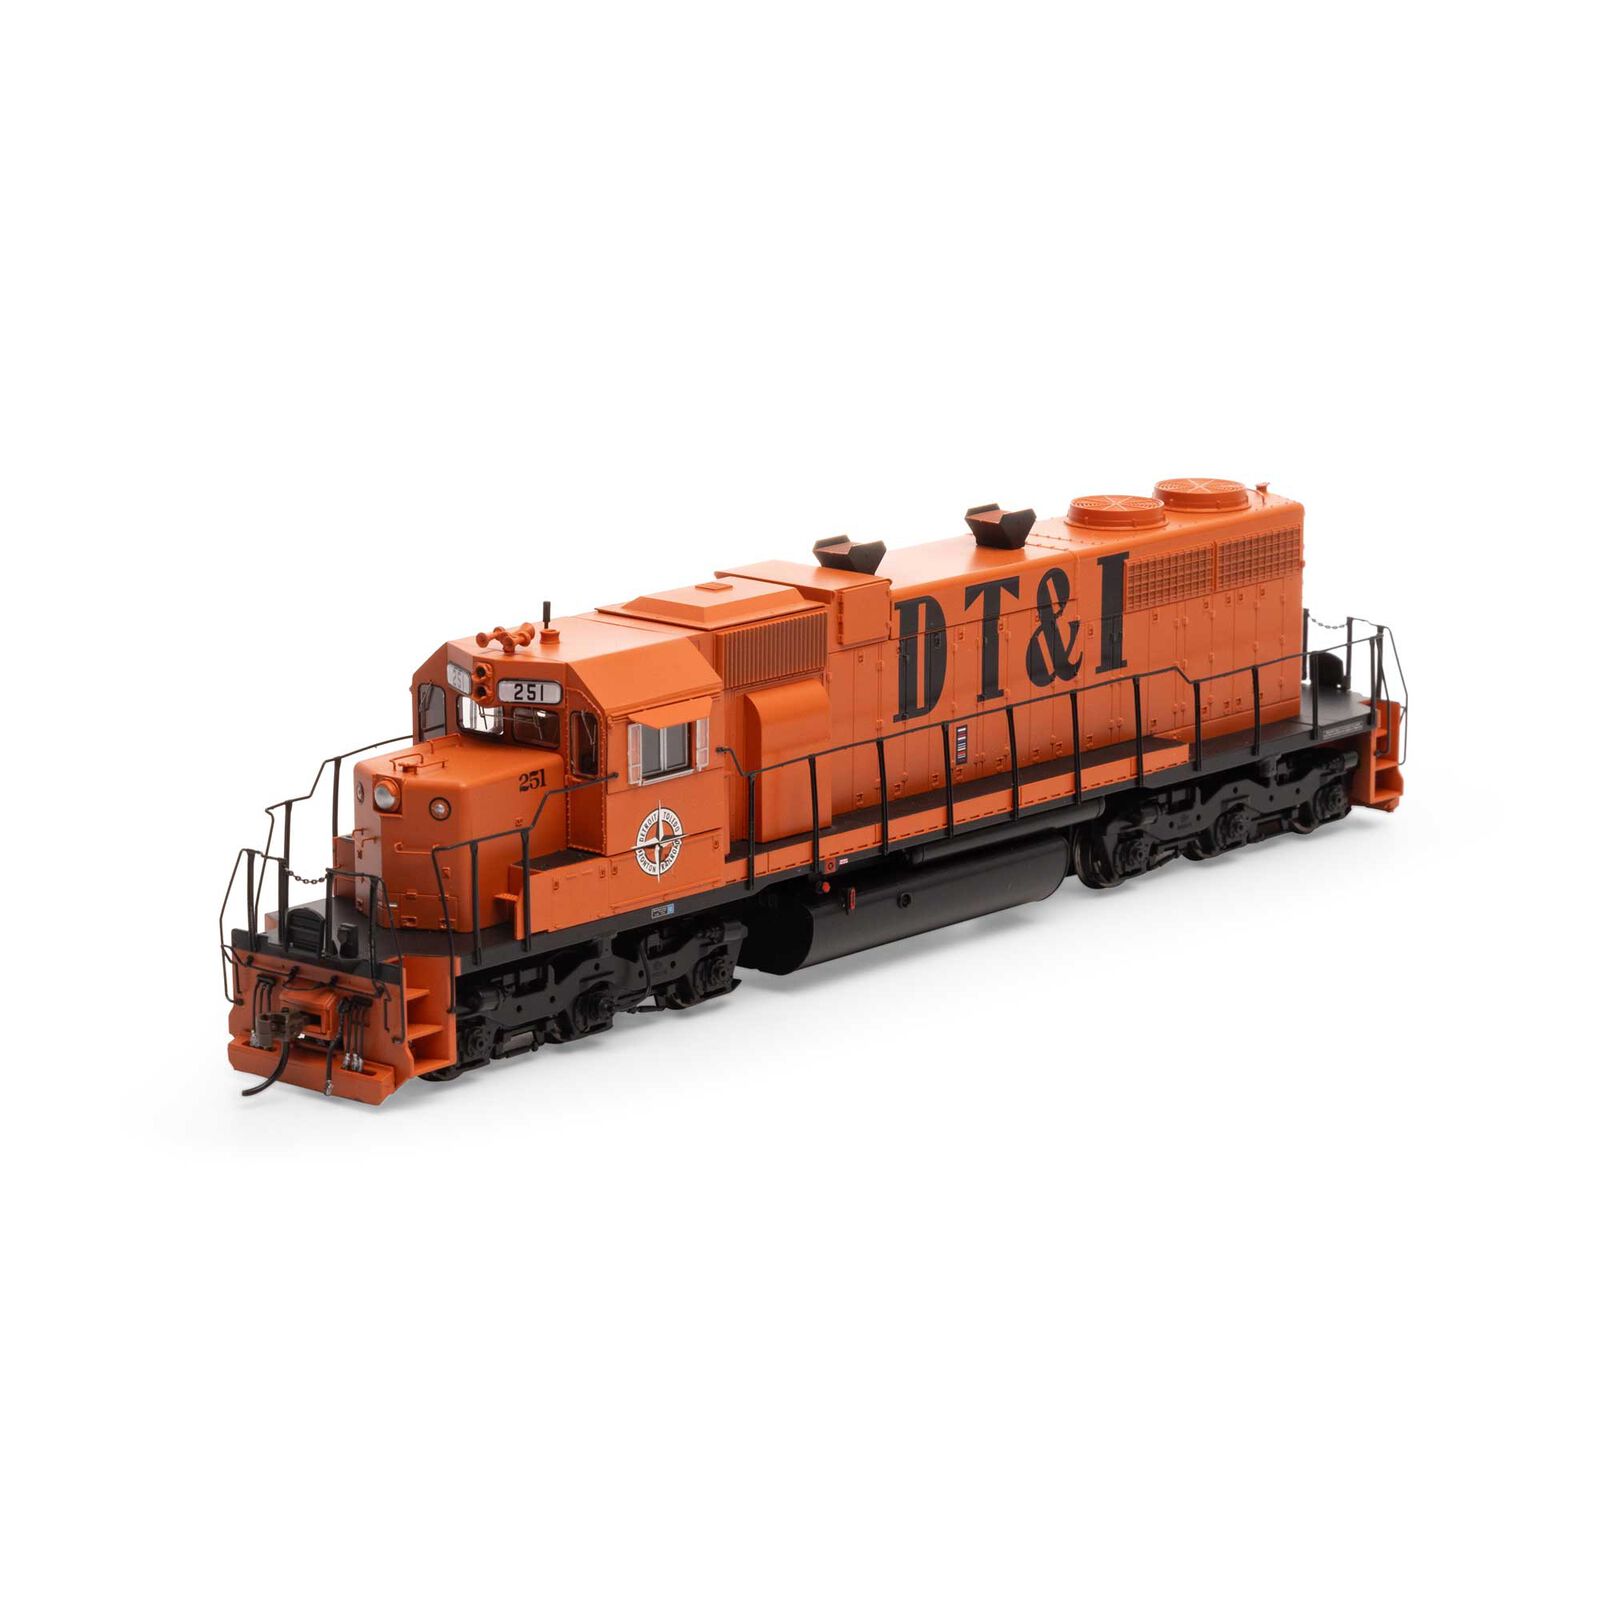 HO RTR SD38 with DCC & Sound, DT&I #251